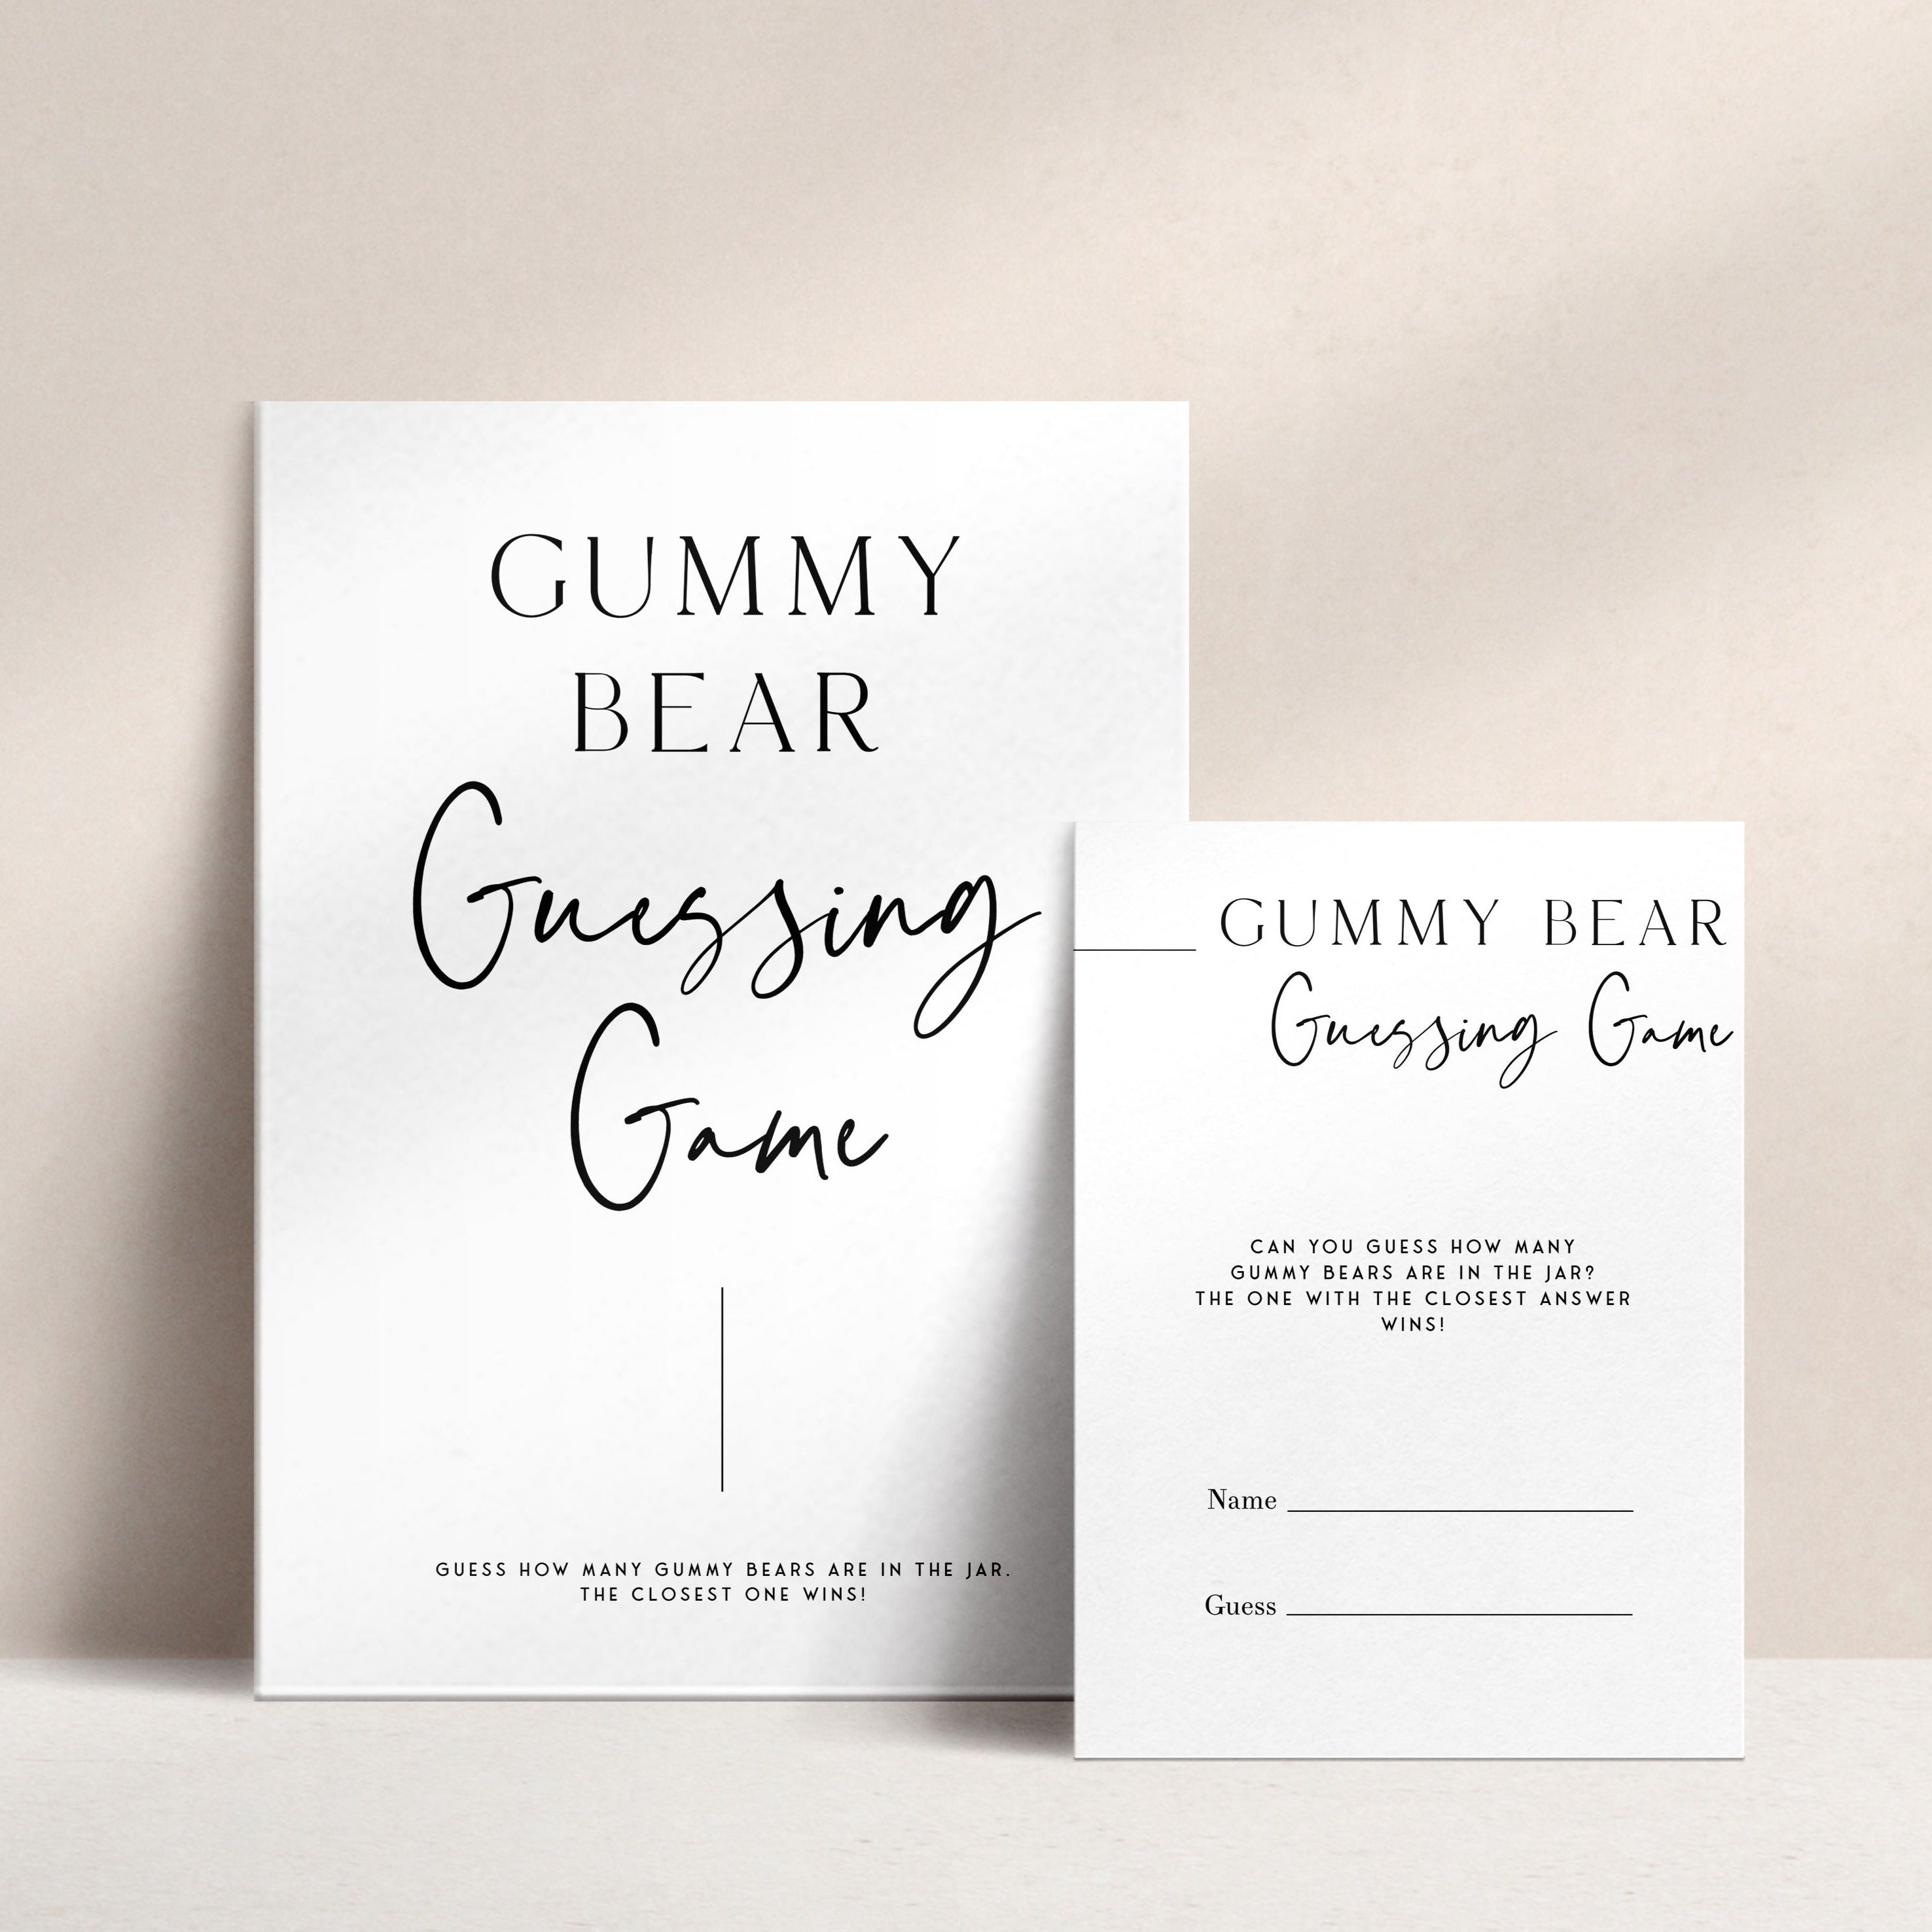 Printable baby shower game gummy bear guessing game with a modern minimalist design